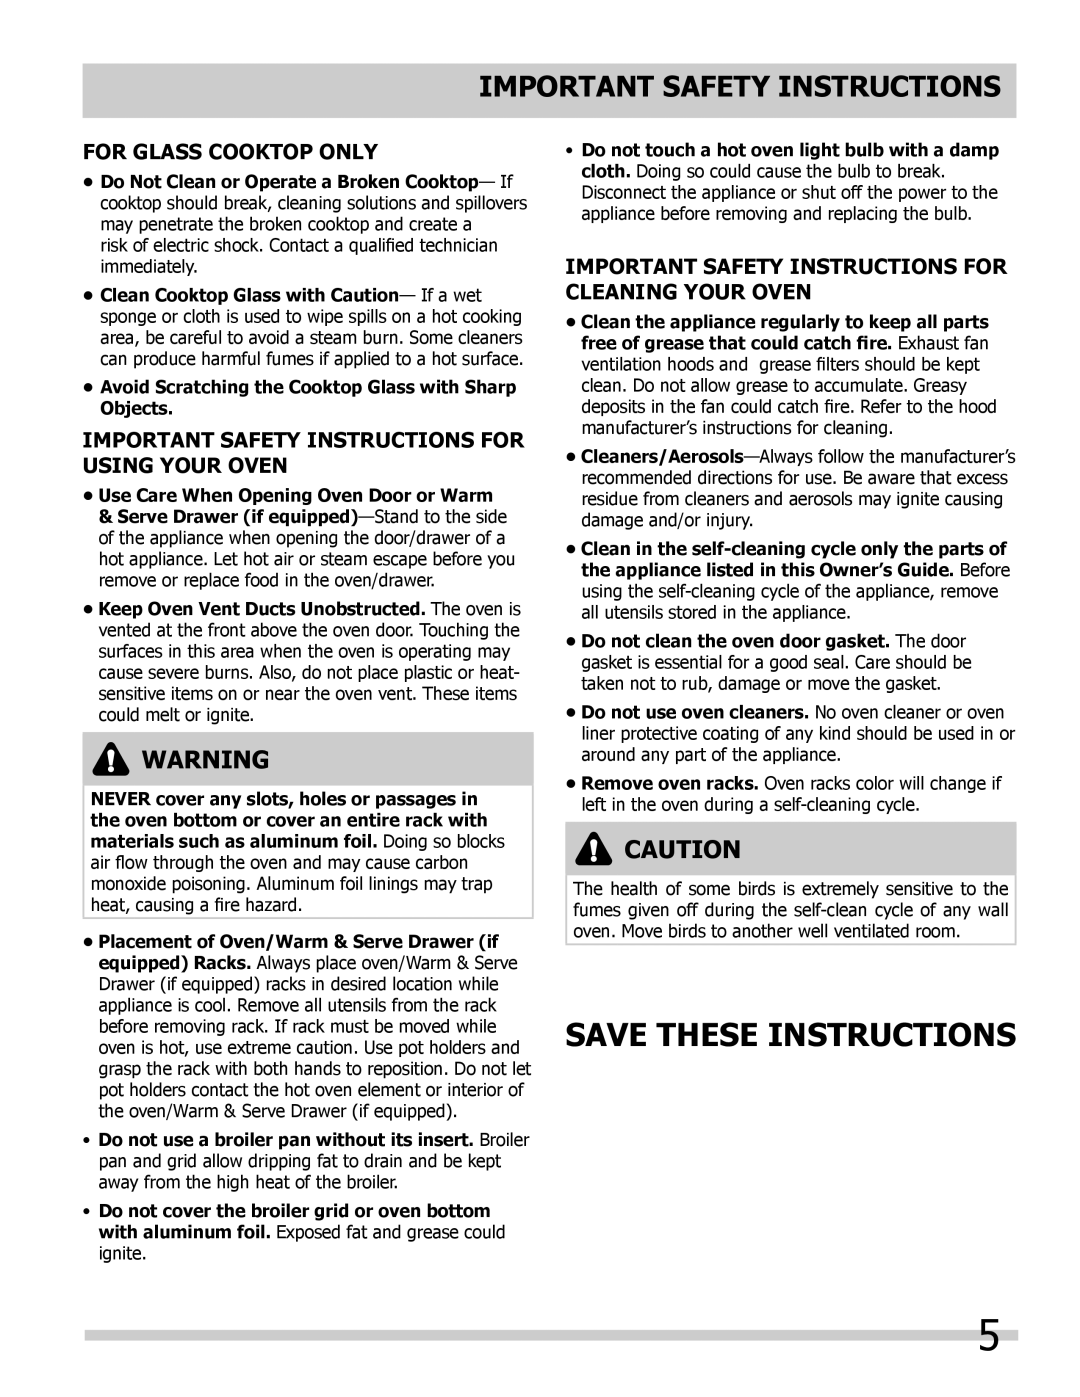 Frigidaire 318205804 For Glass Cooktop Only, Important Safety Instructions For Using Your Oven, Save These Instructions 